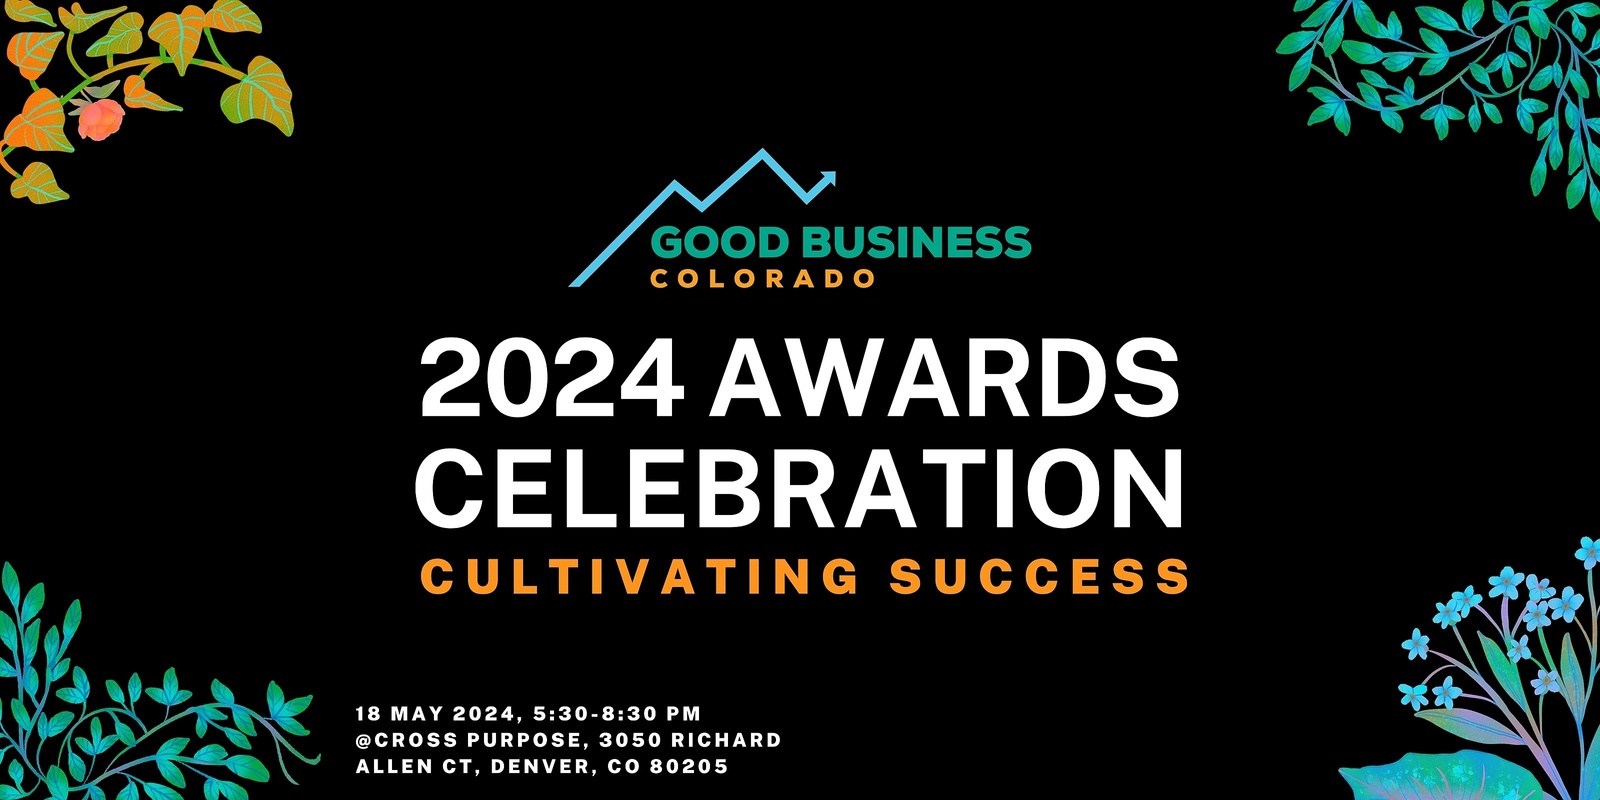 Banner image for 2024 Good Business Colorado Awards Celebration: Cultivating Success